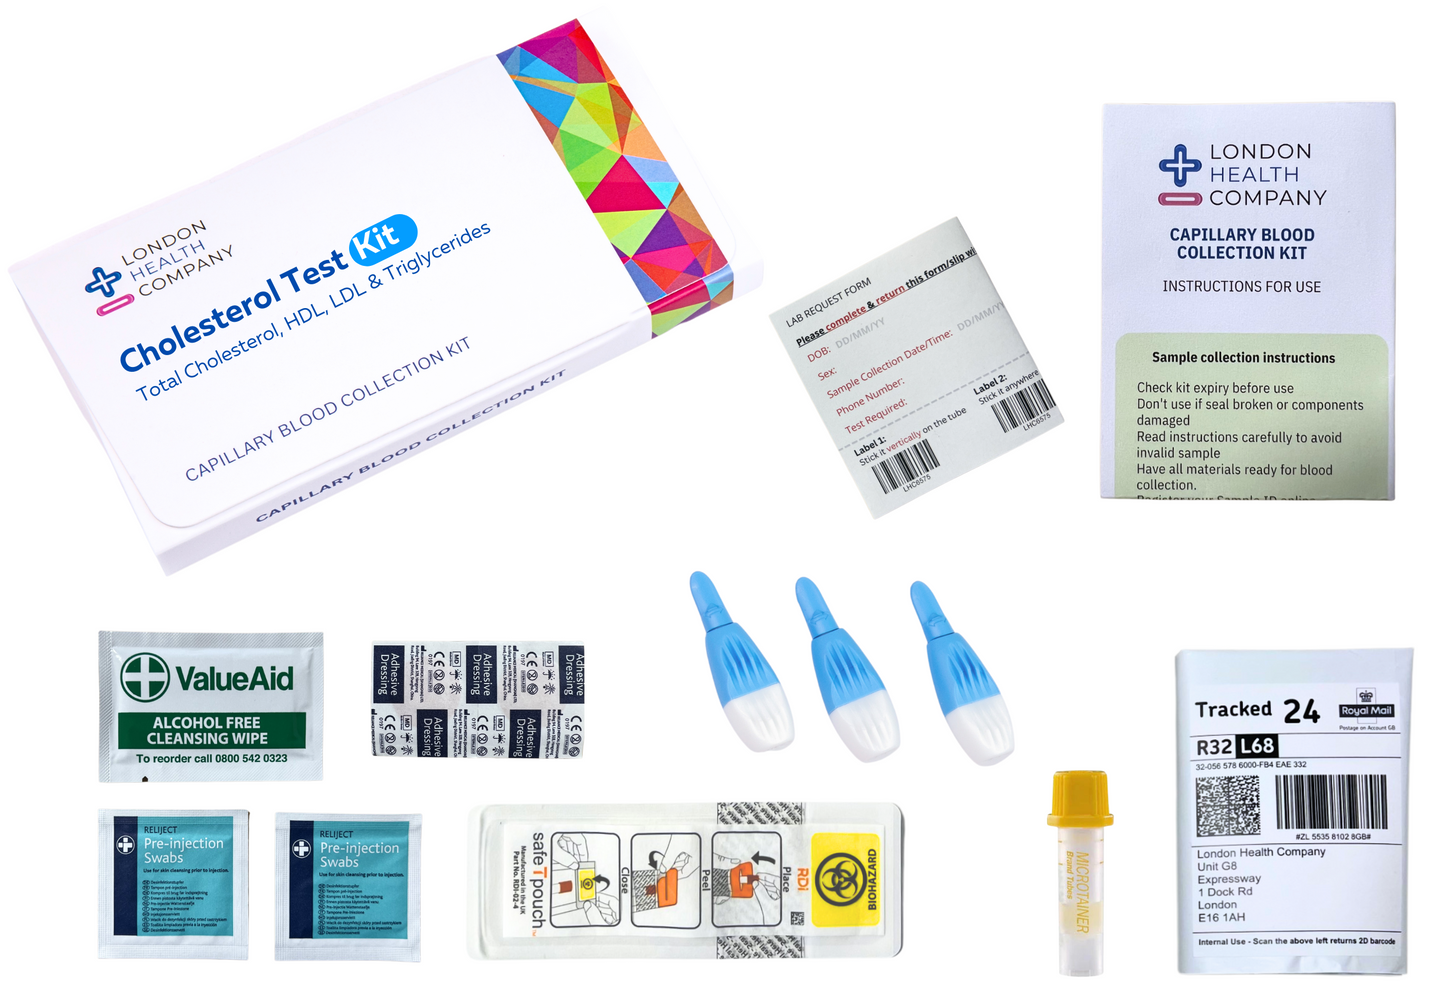 Complete blood collection kit for cholesterol lipid profile ldl hdl triglycerides including instructions, form, tube, pouch, tube holder, prepaid envelope, plasters, lancets, wipes, and swabs.